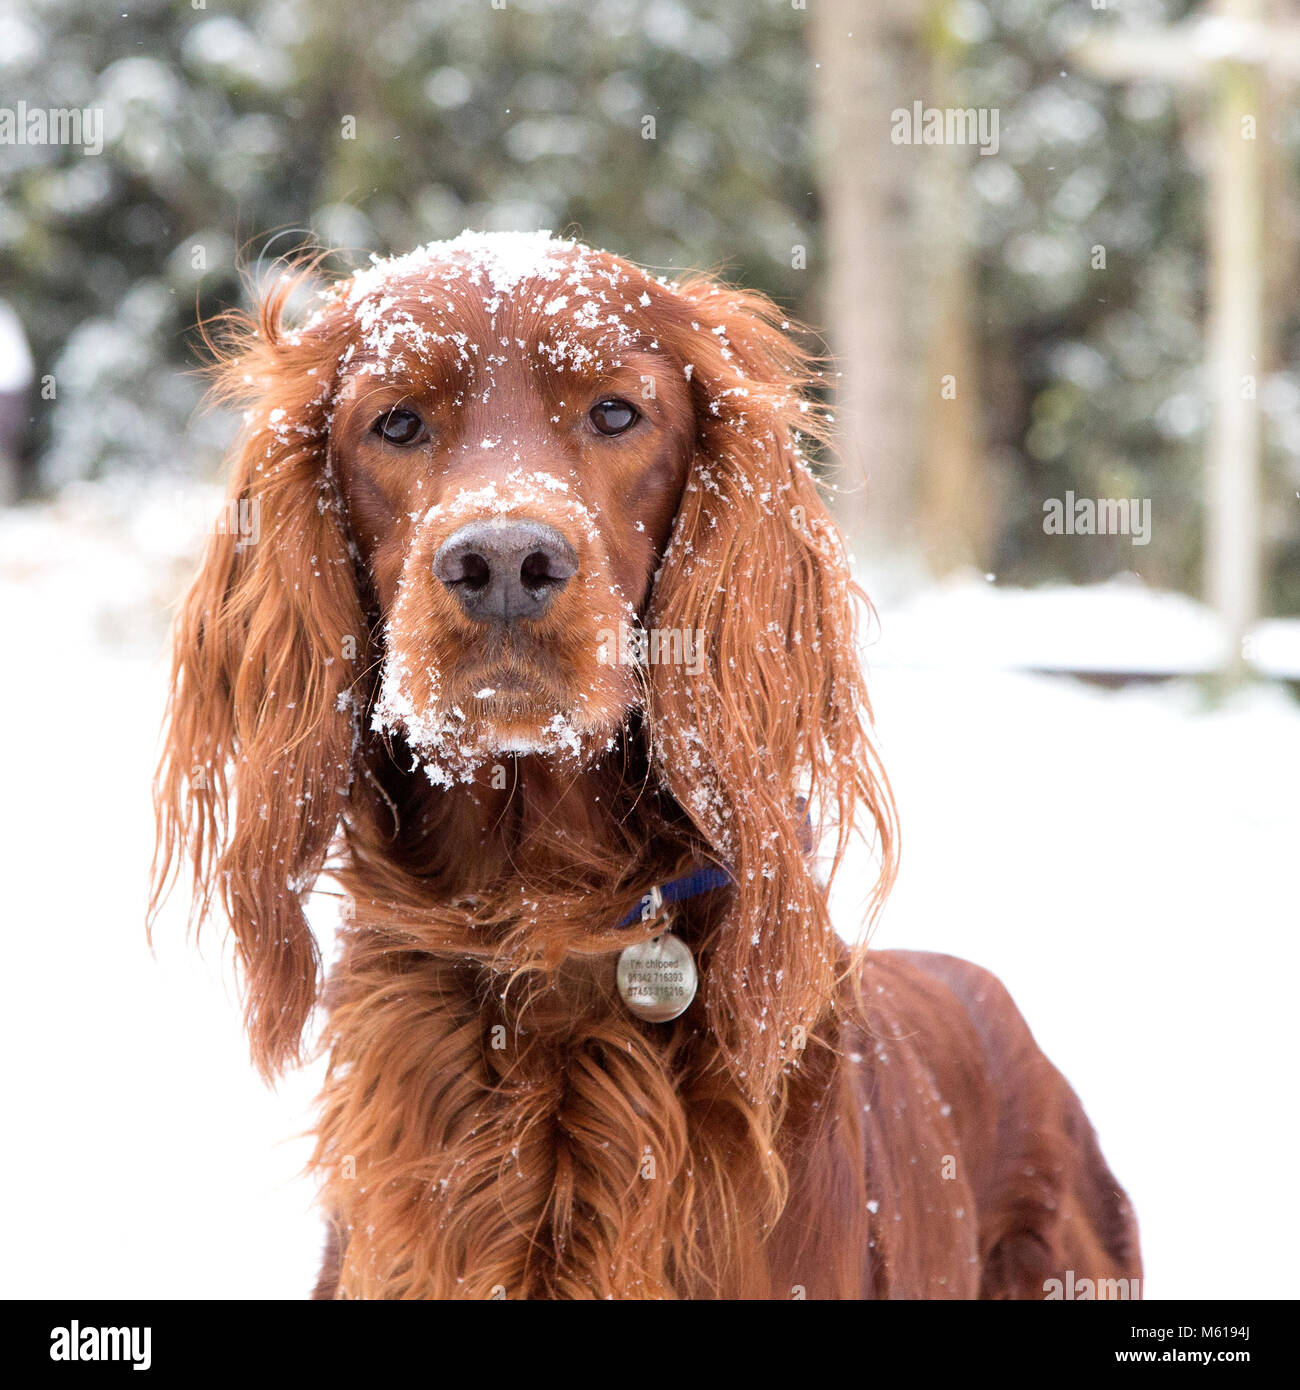 Irish Setter / Red Setter In a Snow Covered Home Garden Stock Photo